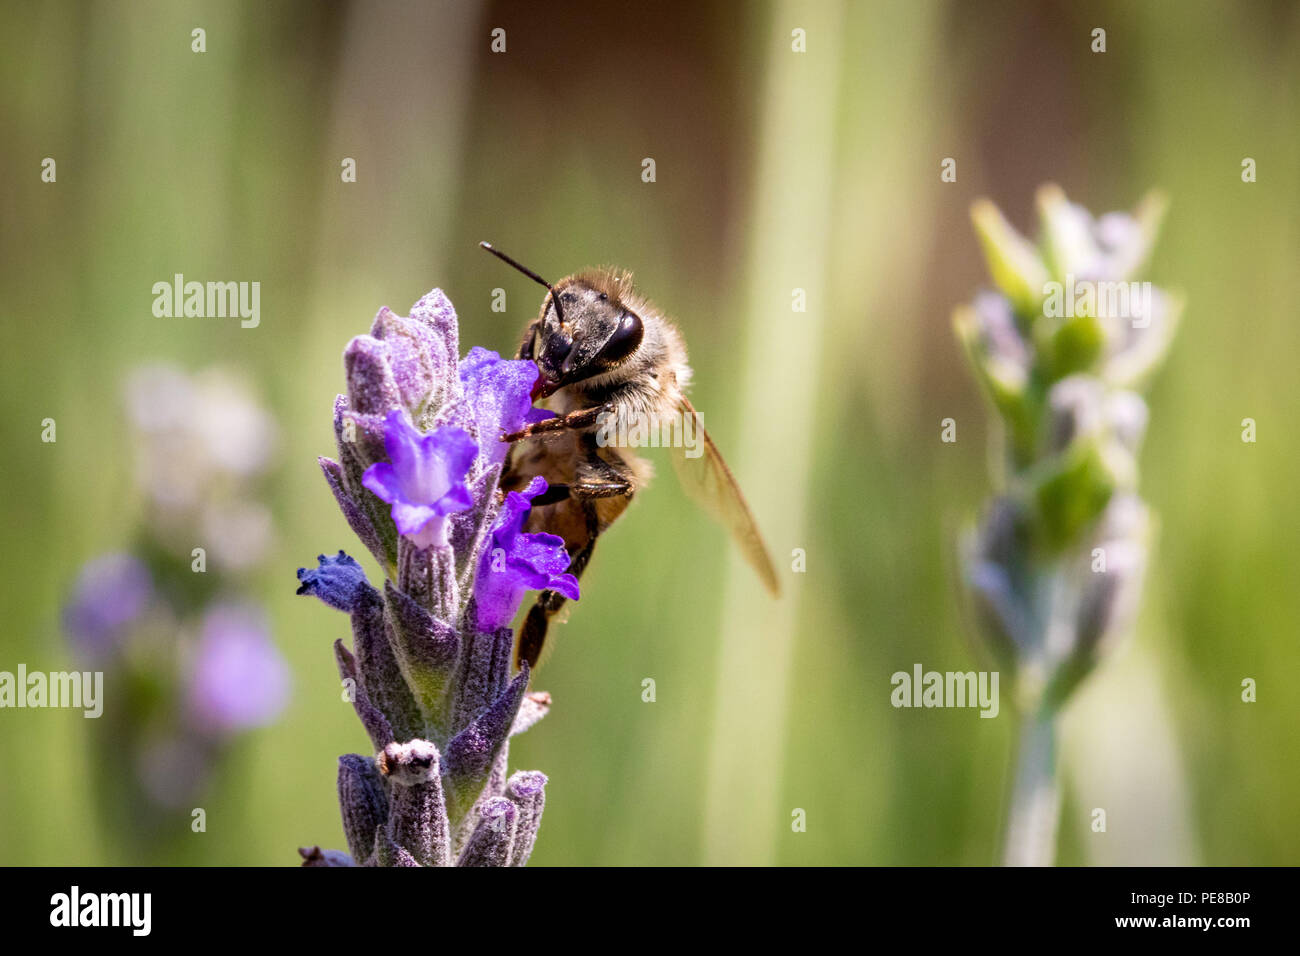 An African honey bee perched on a stick of lavender. Stock Photo